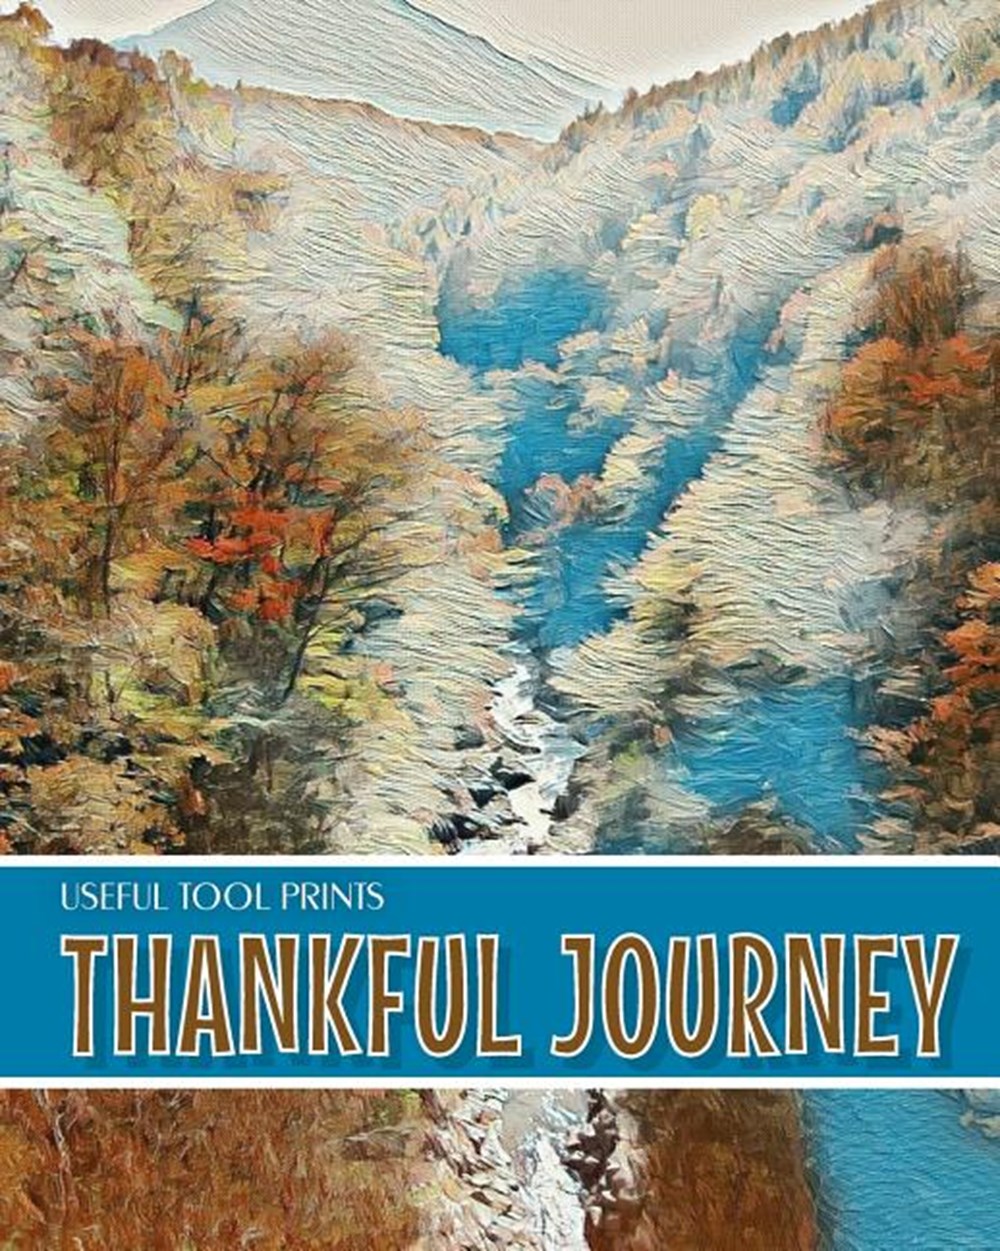 Useful Tool Prints Thankful Journey Daily Gratitude Journal Planner Gratitude Log 100 Pages 8"x10" G